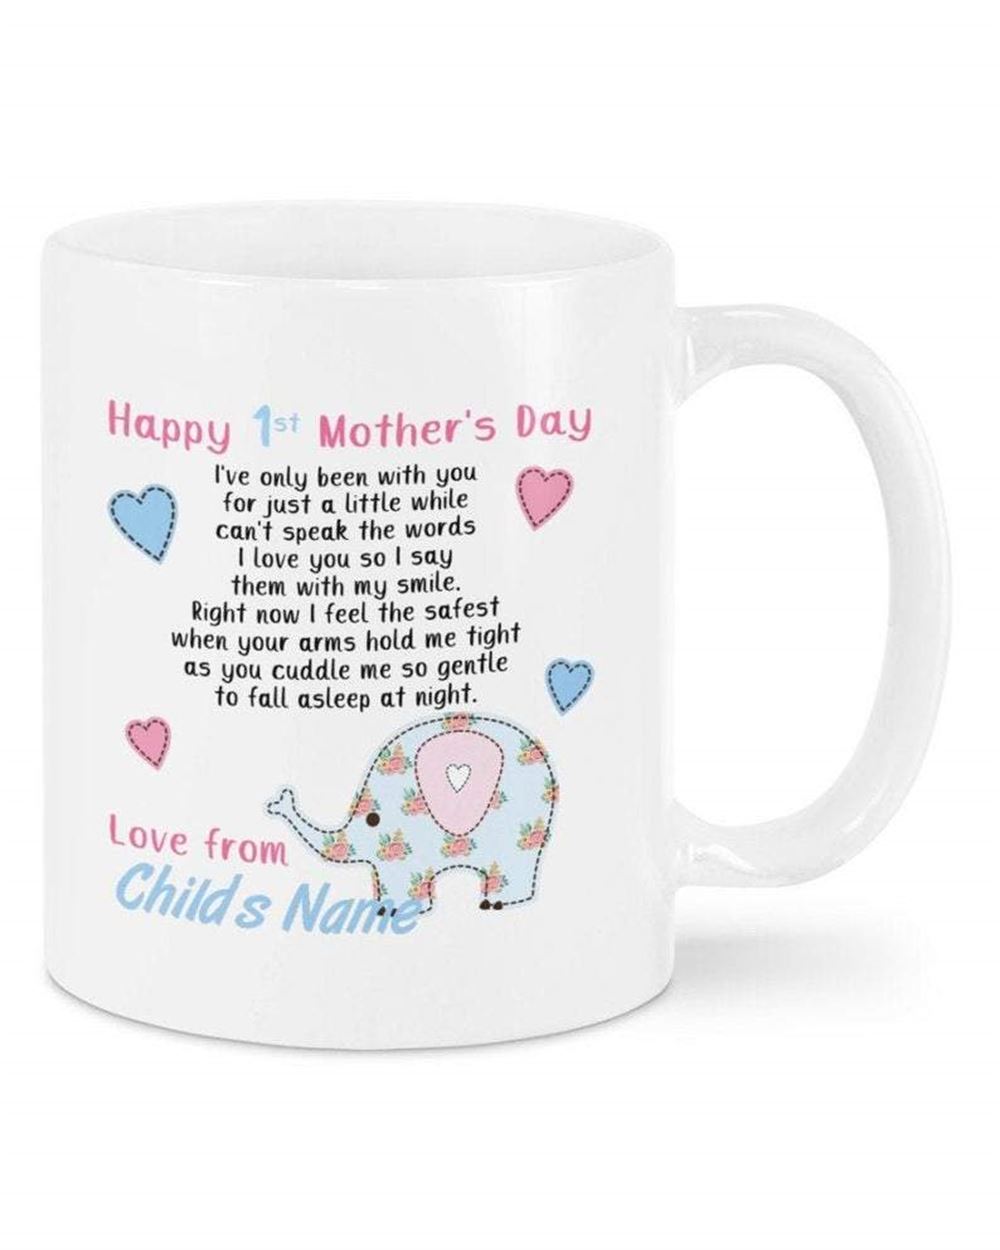 Personalized Happy 1st Mothers Day Mug Cute Elephant Mug Baby Shower Gift Best Mothers Day Gift Idea